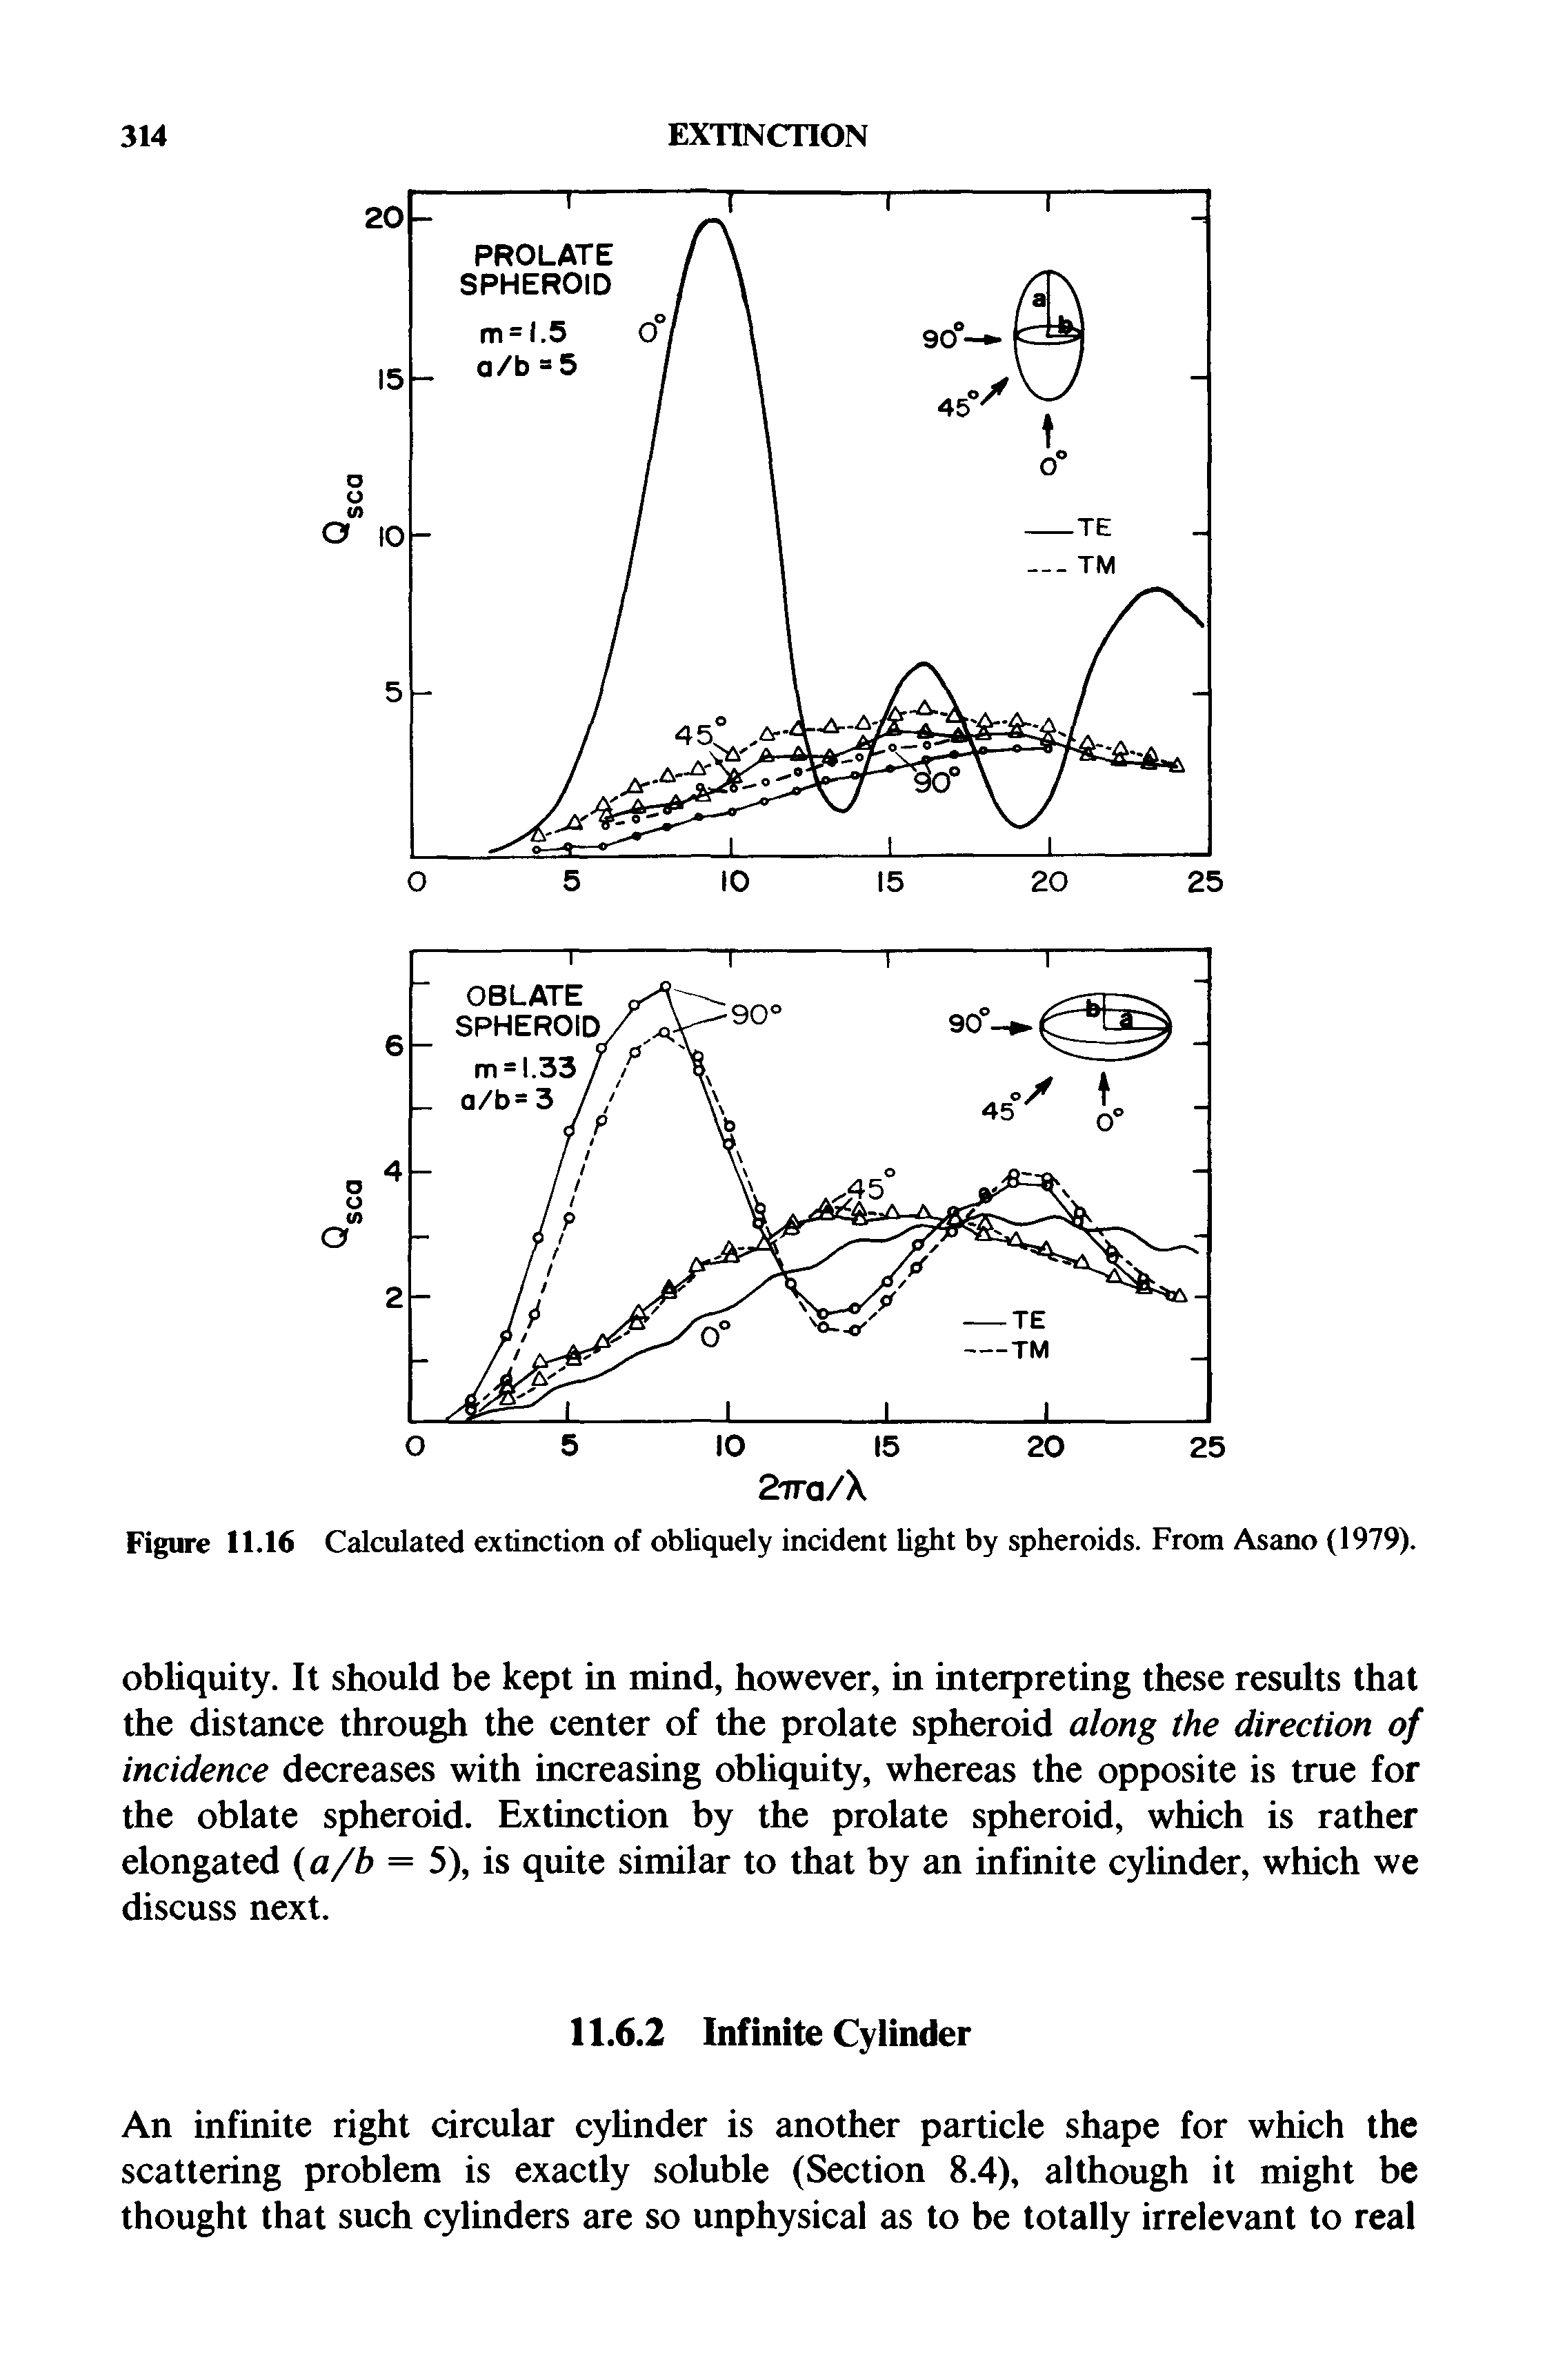 Figure 11.16 Calculated extinction of obliquely incident light by spheroids. From Asano (1979).